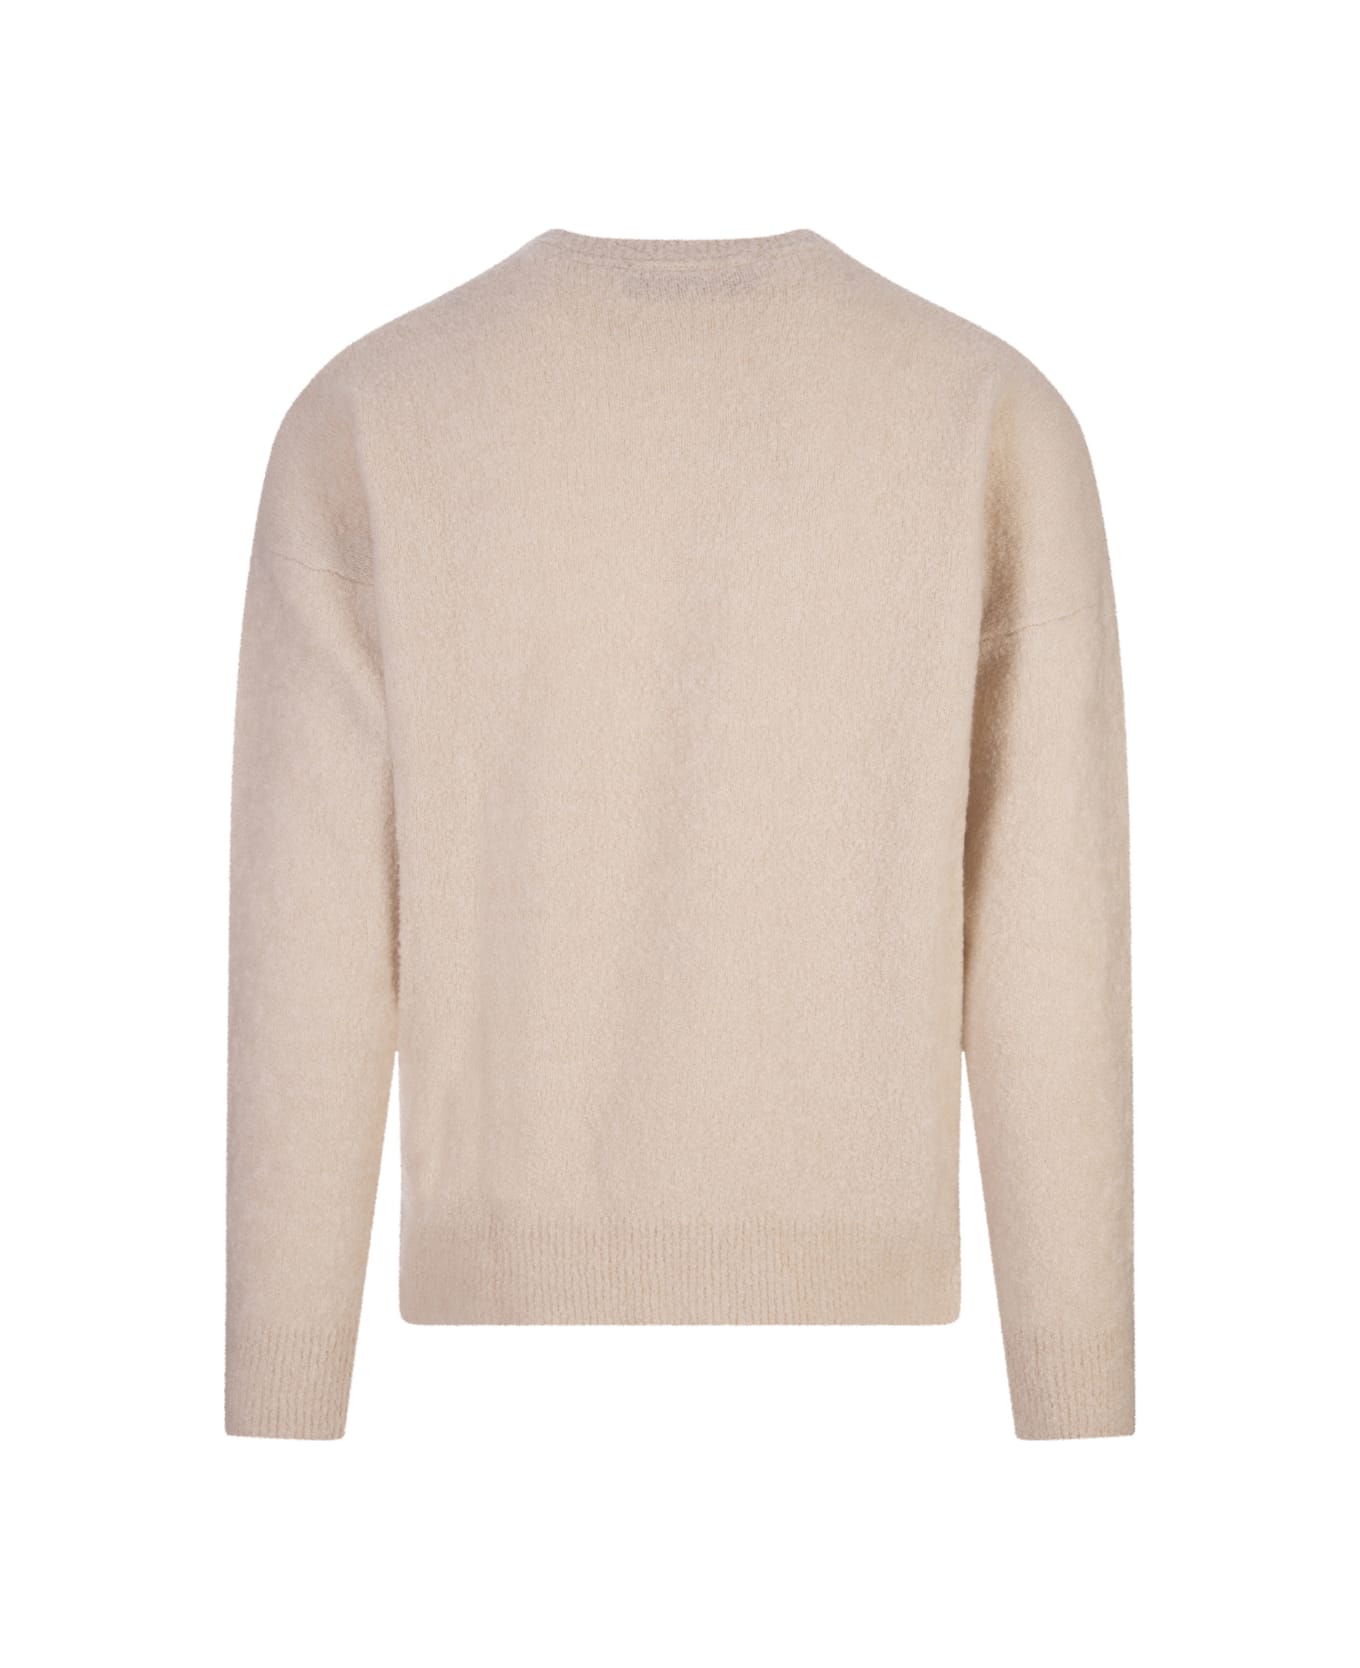 Hugo Boss Relaxed Fit Sweater In Beige Cashmere And Silk - Brown